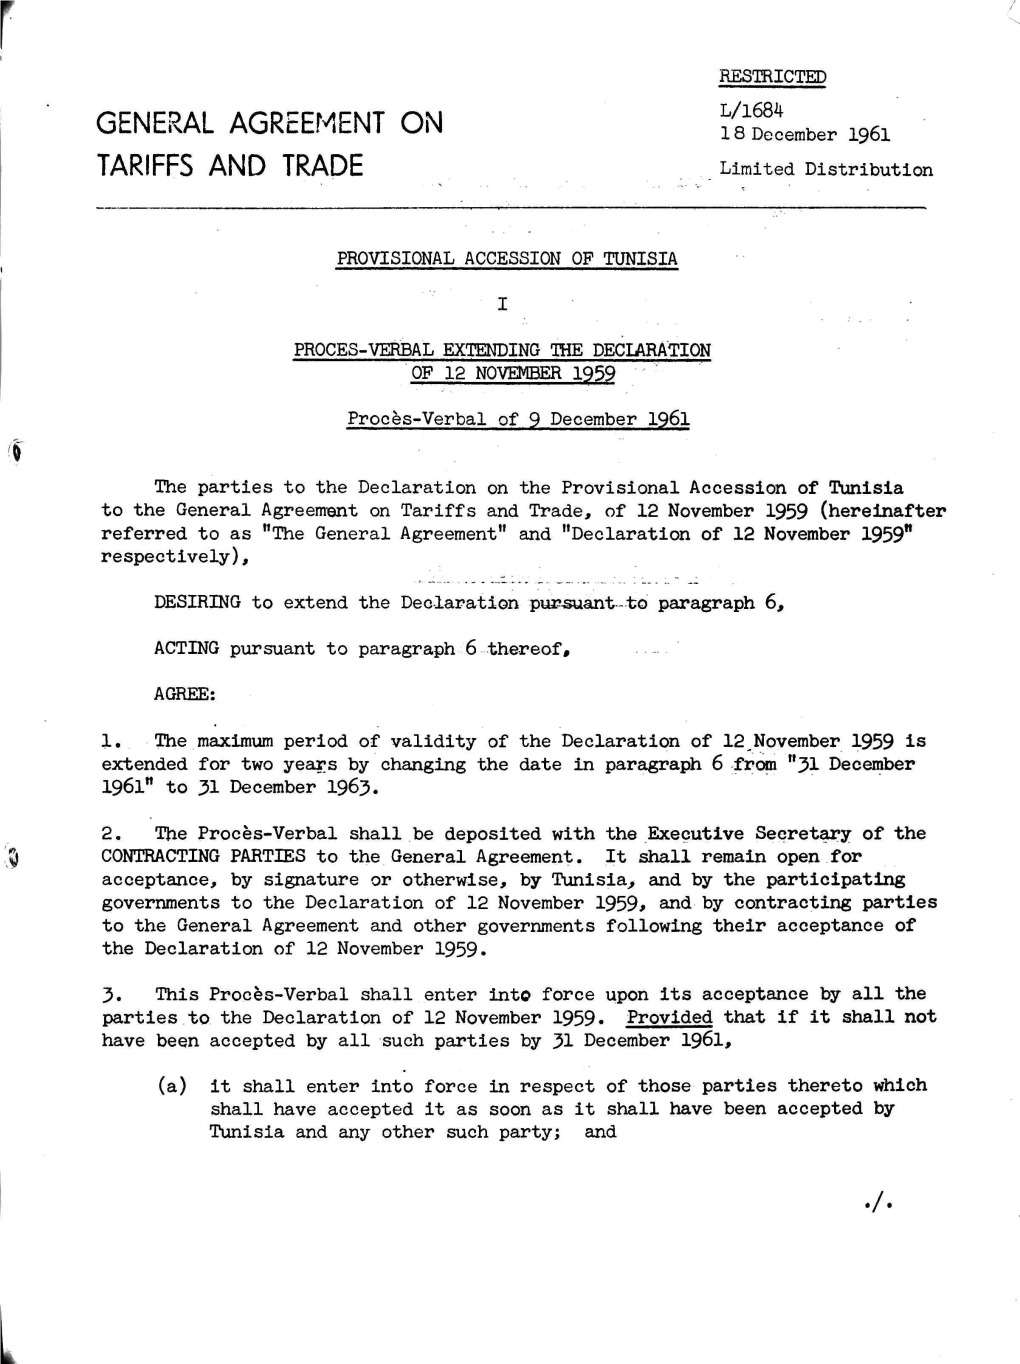 General Agreement on Tariffs and Trade, of 12 November 1959 (Hereinafter Referred to As "The General Agreement" and "Declaration of 12 November 1959" Respectively)